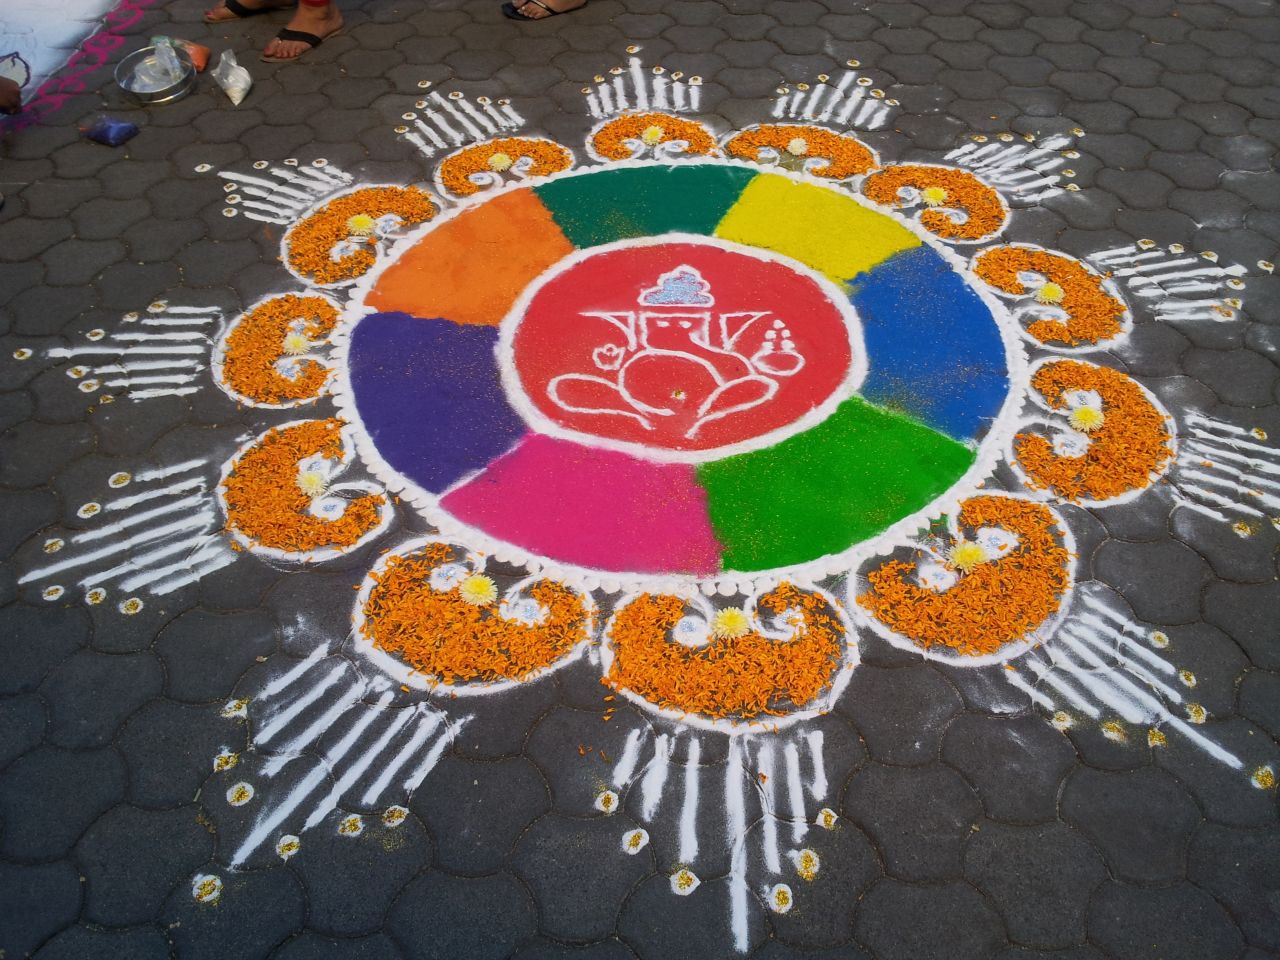 A rangoli artwork, as created and captured by iReporter <a href="http://ireport.cnn.com/people/indtechieguy">Kshitij Sharma</a>, adorns a sidewalk in Pune, India. "I think this festival reminds us to stay away from bad things and to promote communal harmony," he says. "The main highlight is of course the lights, at night whole cities and towns look lovely because of the lights."